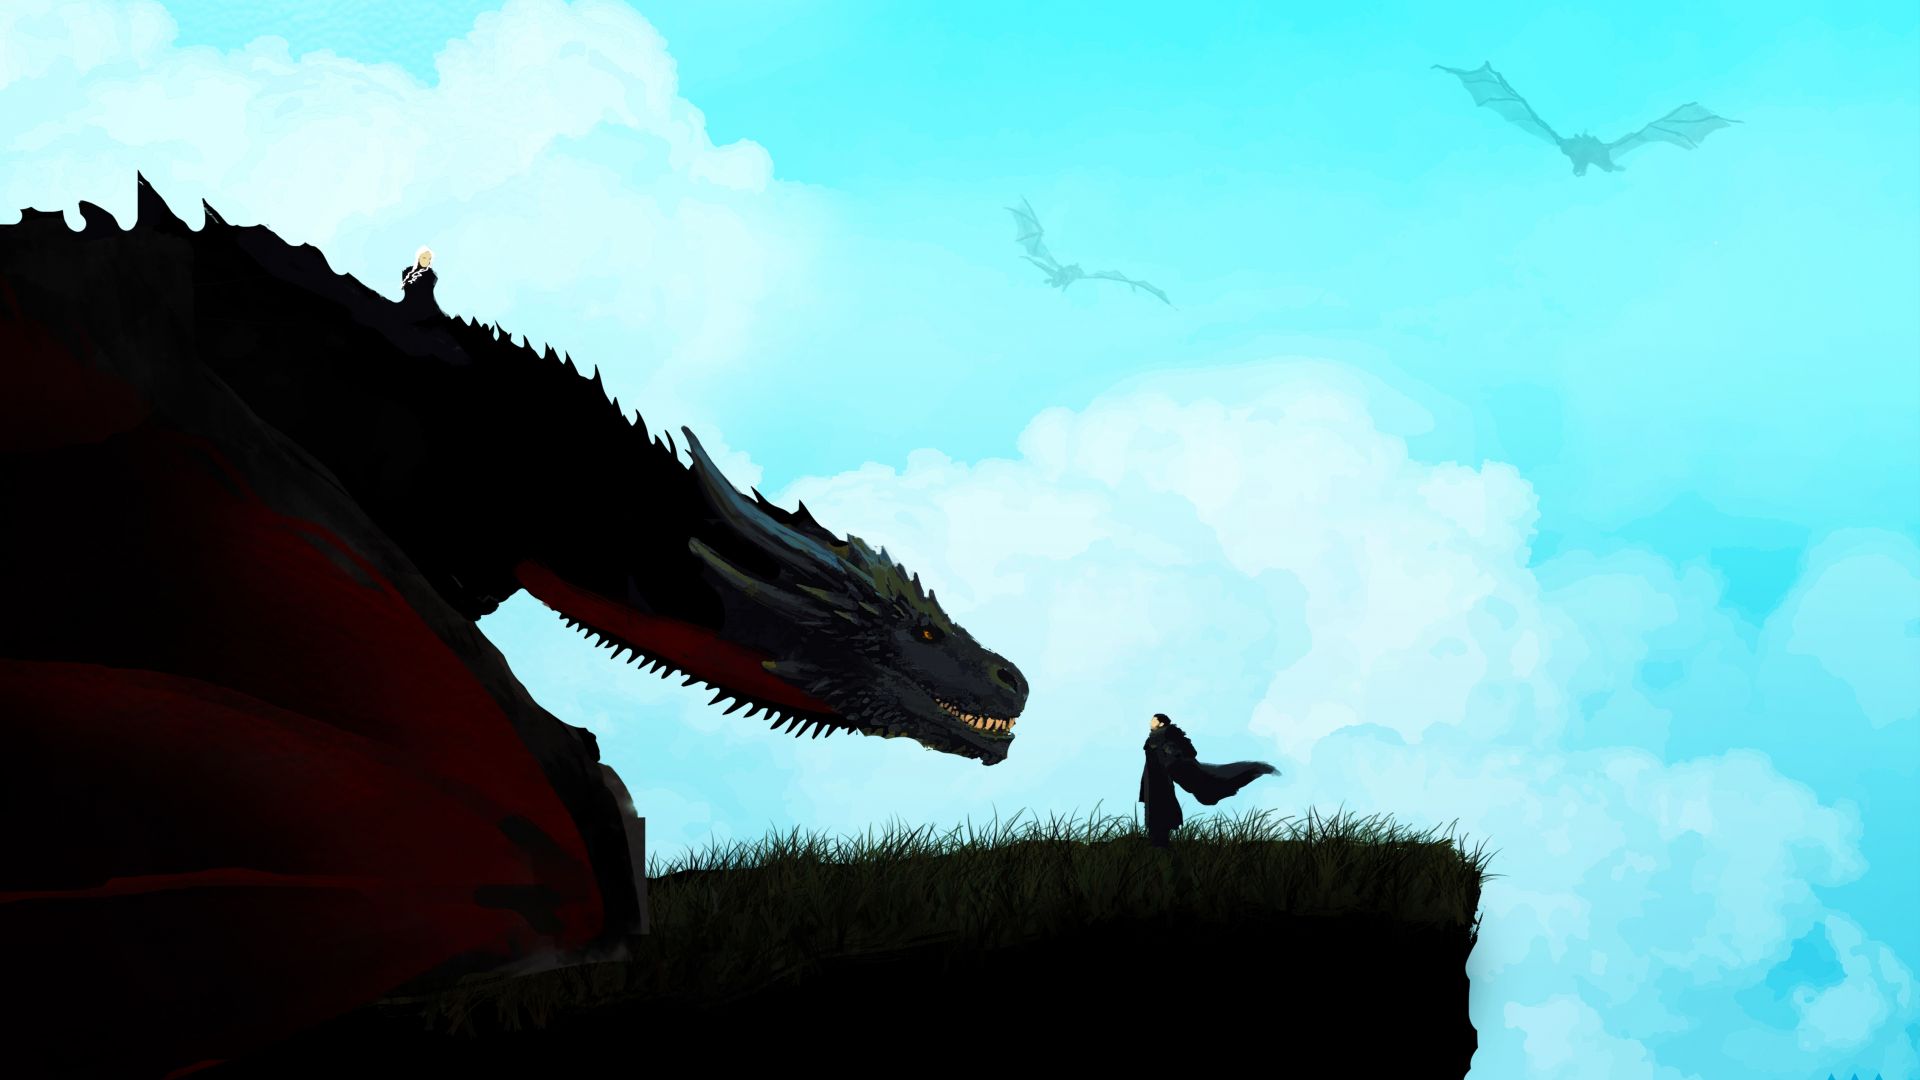 Desktop wallpaper jon snow and dragon, game of thrones, art, HD image, picture, background, 88be24